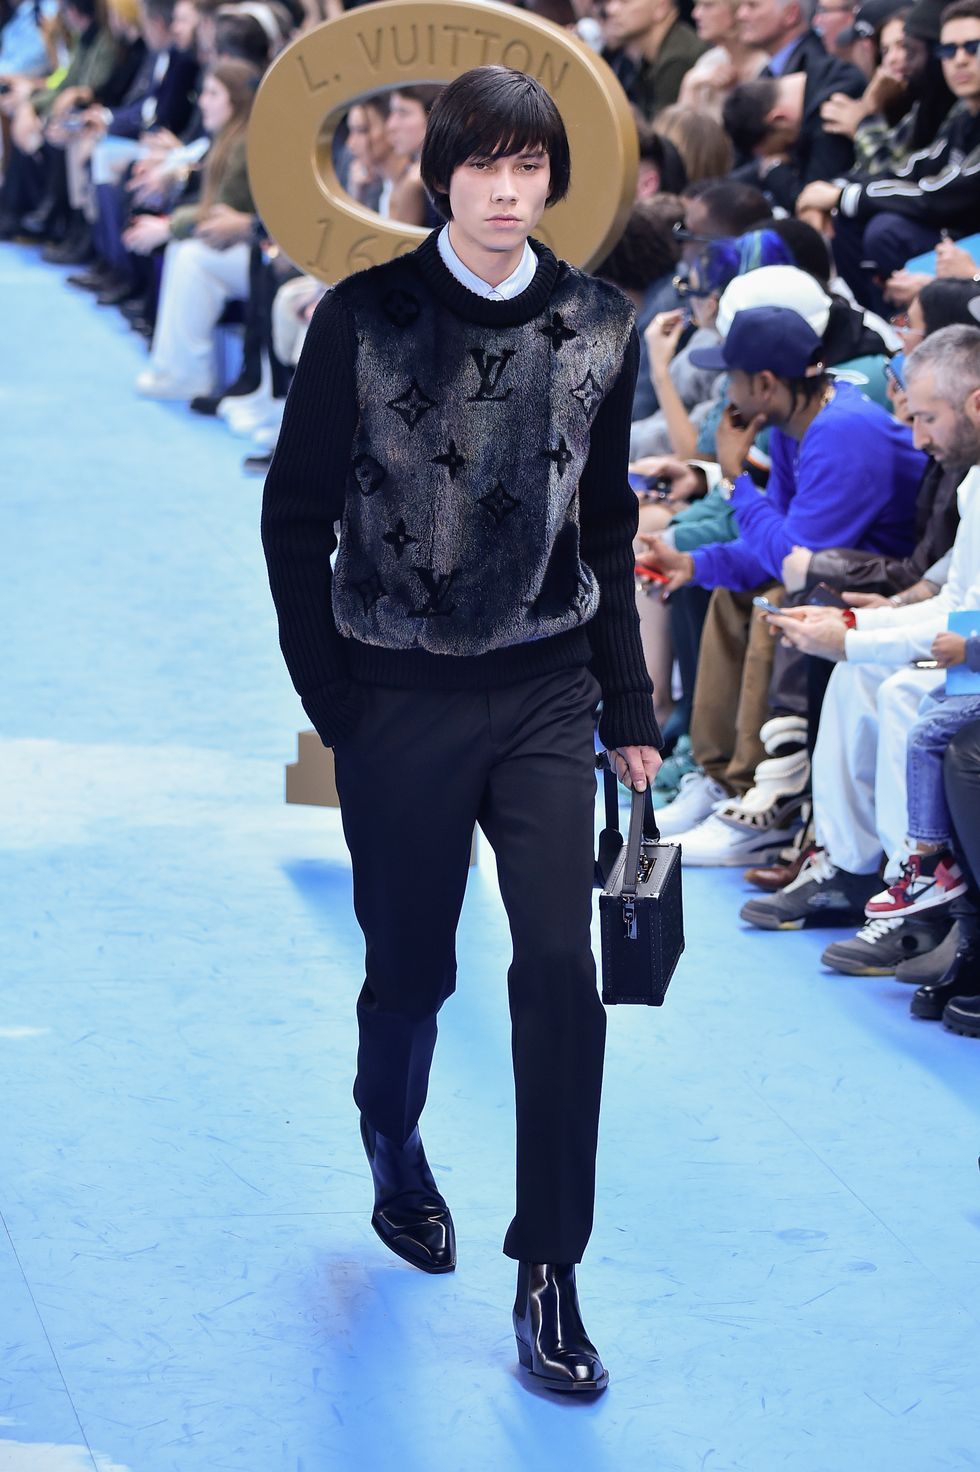 Louis Vuitton, the AW 20/21 men's fashion collection designed by